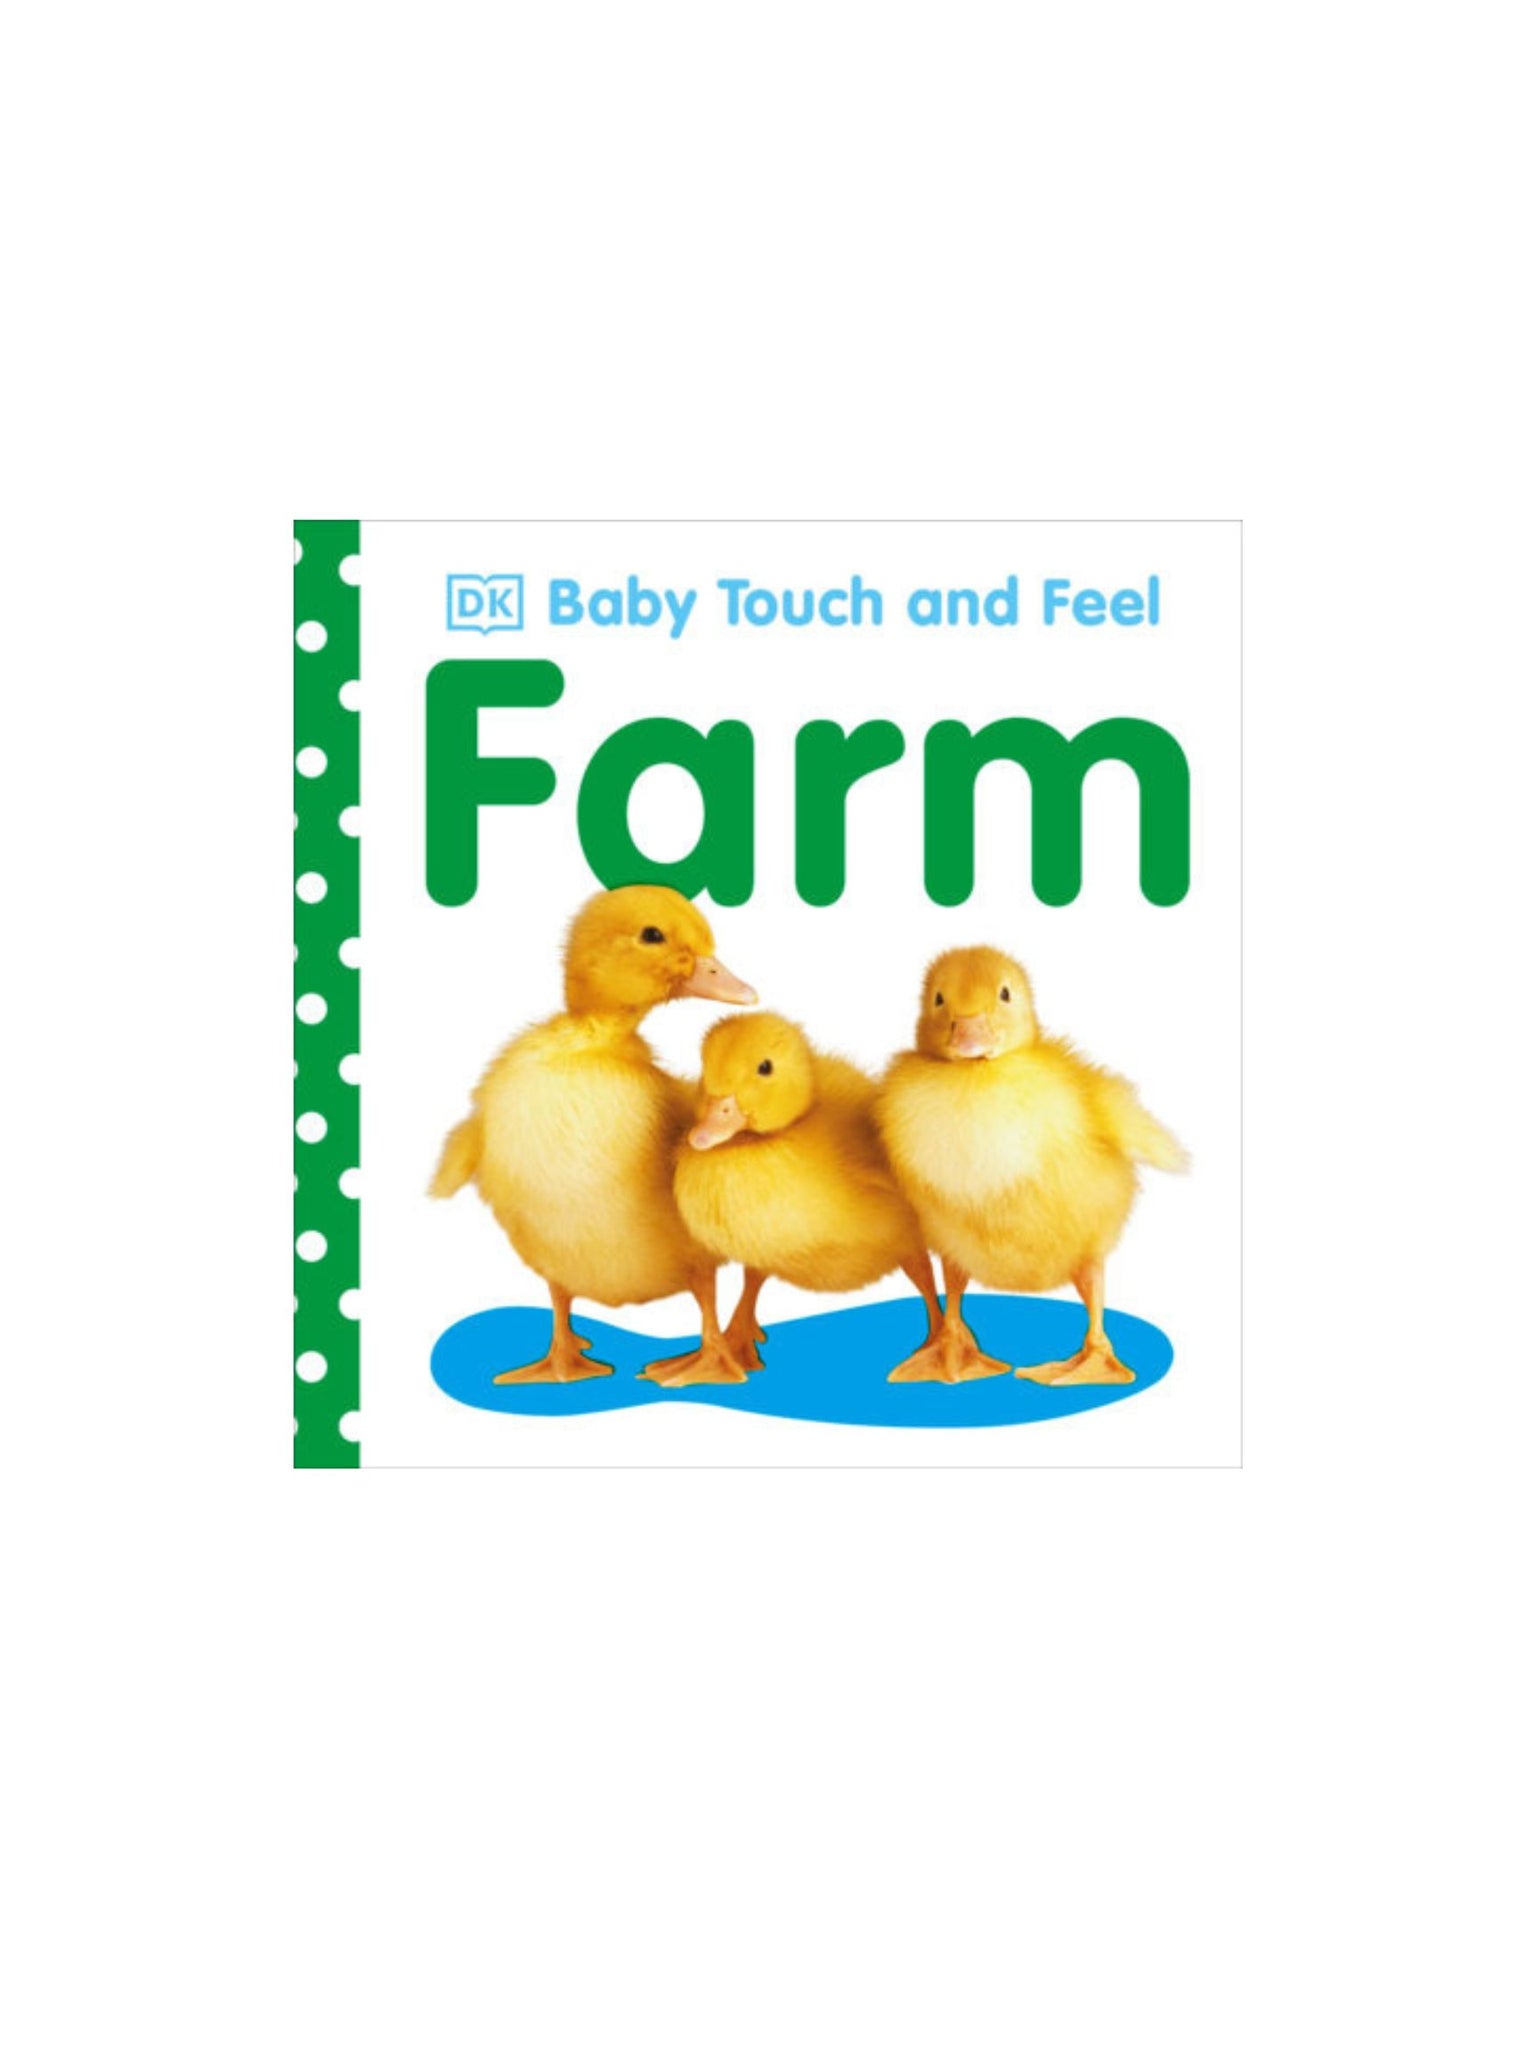 book cover shows 3 yellow ducks on a blue puddle